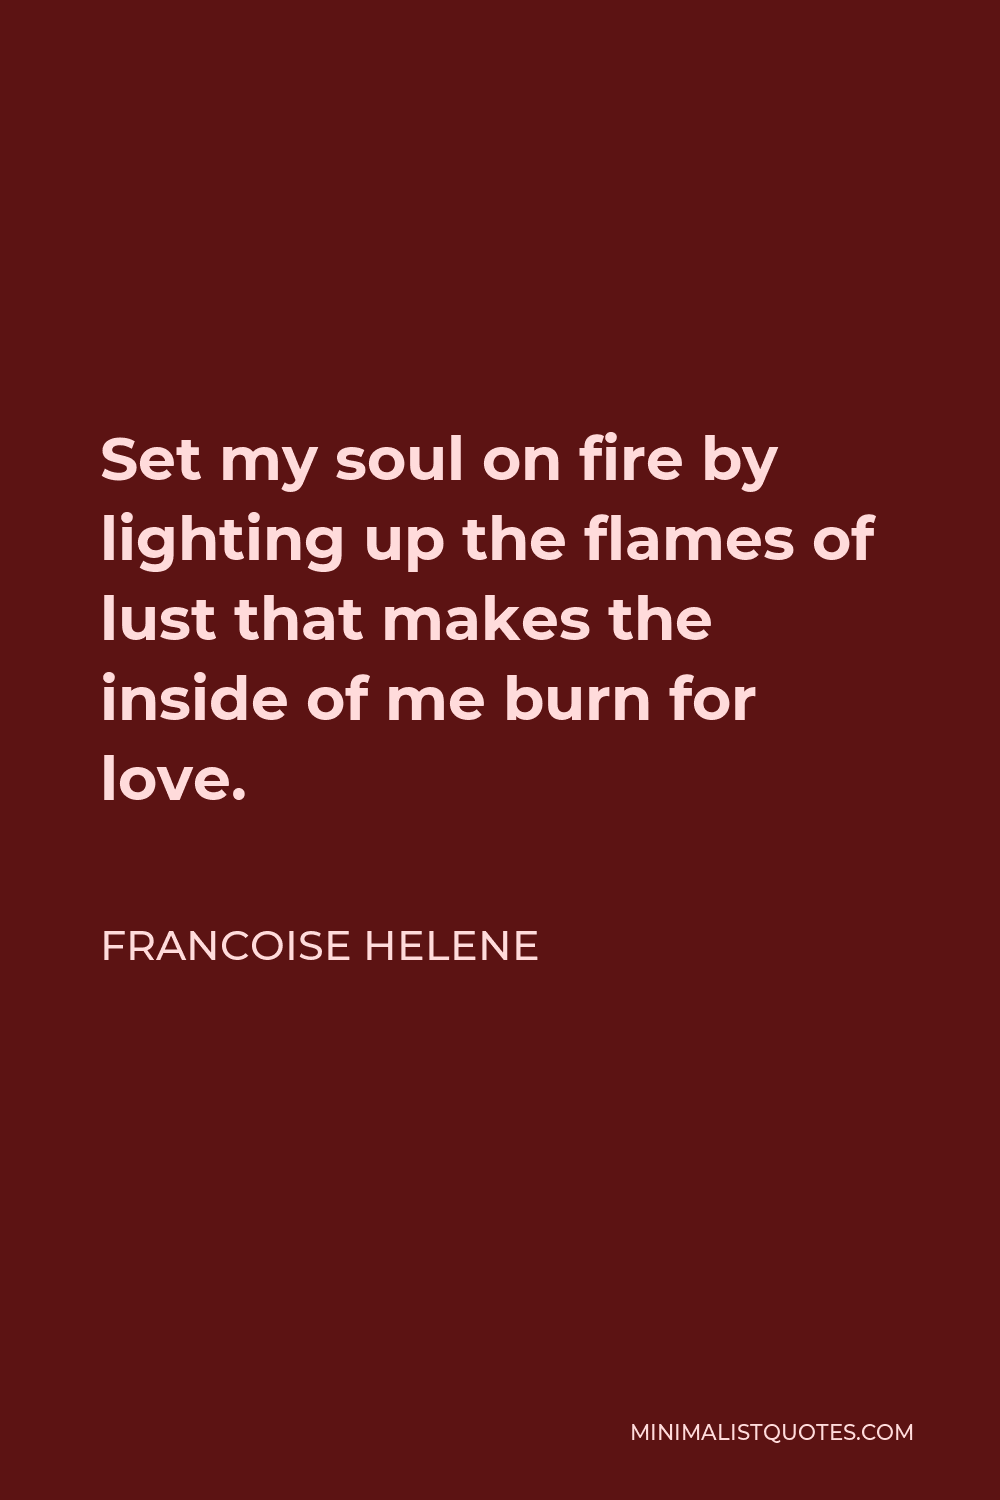 Francoise Helene Quote - Set my soul on fire by lighting up the flames of lust that makes the inside of me burn for love.